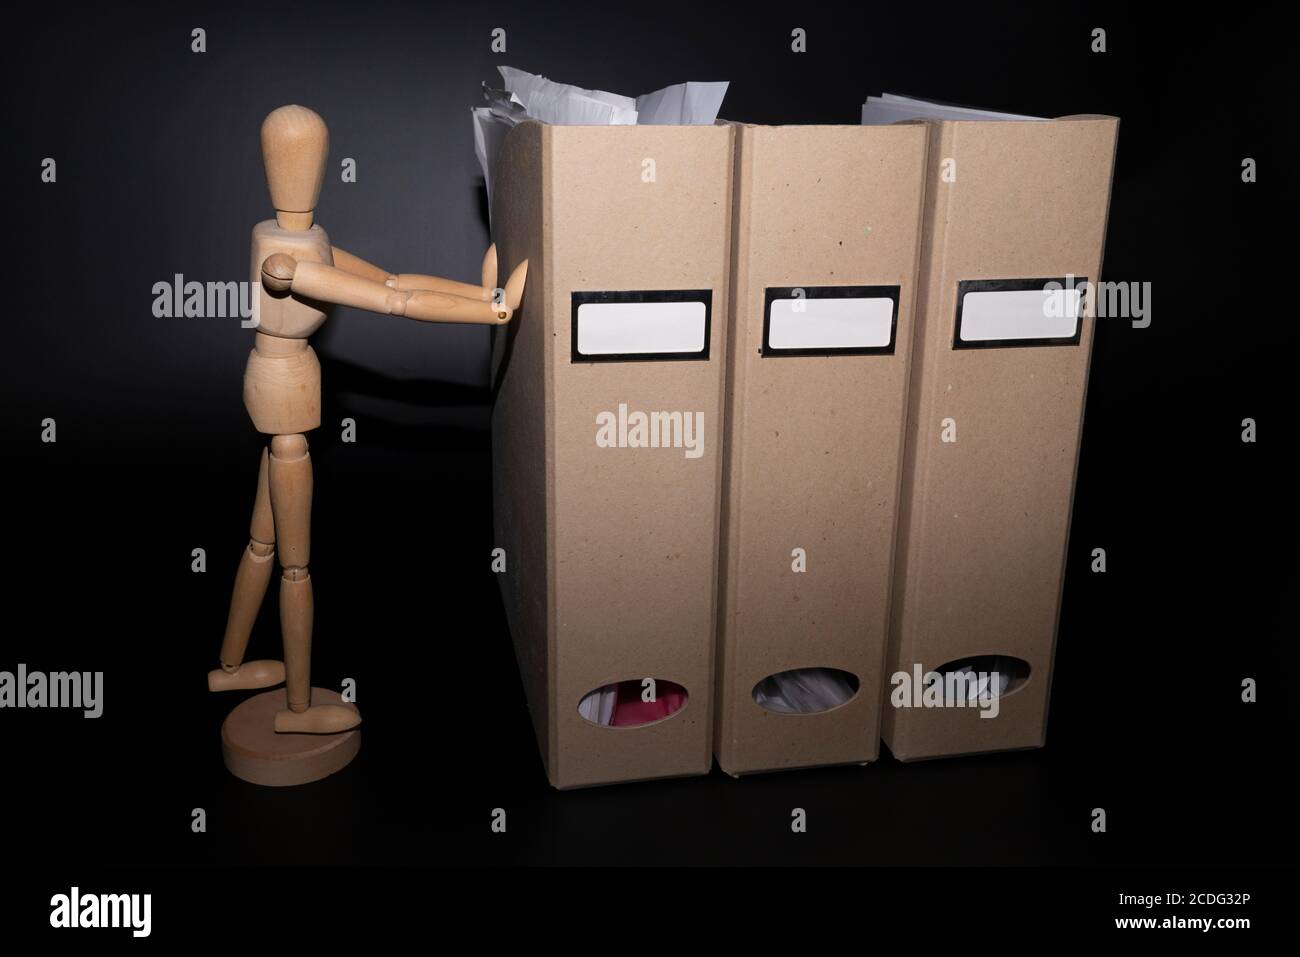 Wooden model figure struggling with three brown cardboard filing boxes. Stock Photo